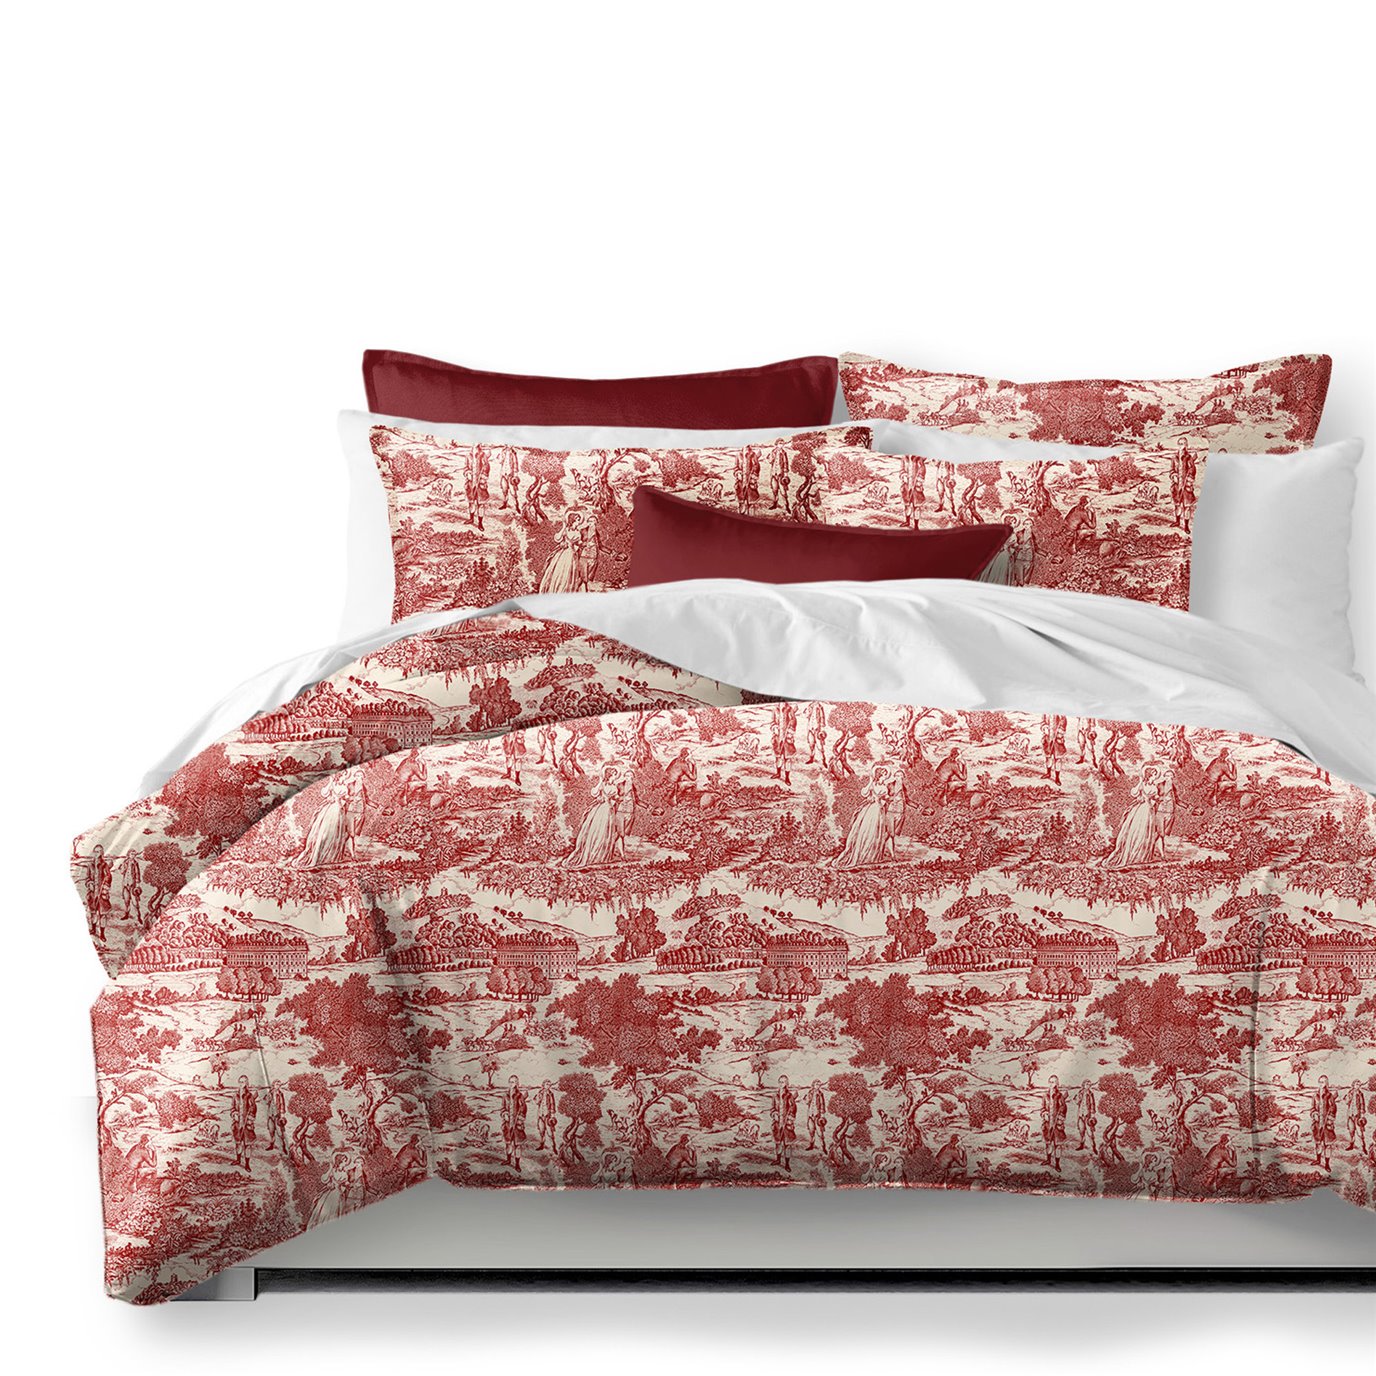 Beau Toile Red Coverlet and Pillow Sham(s) Set - Size Super Queen